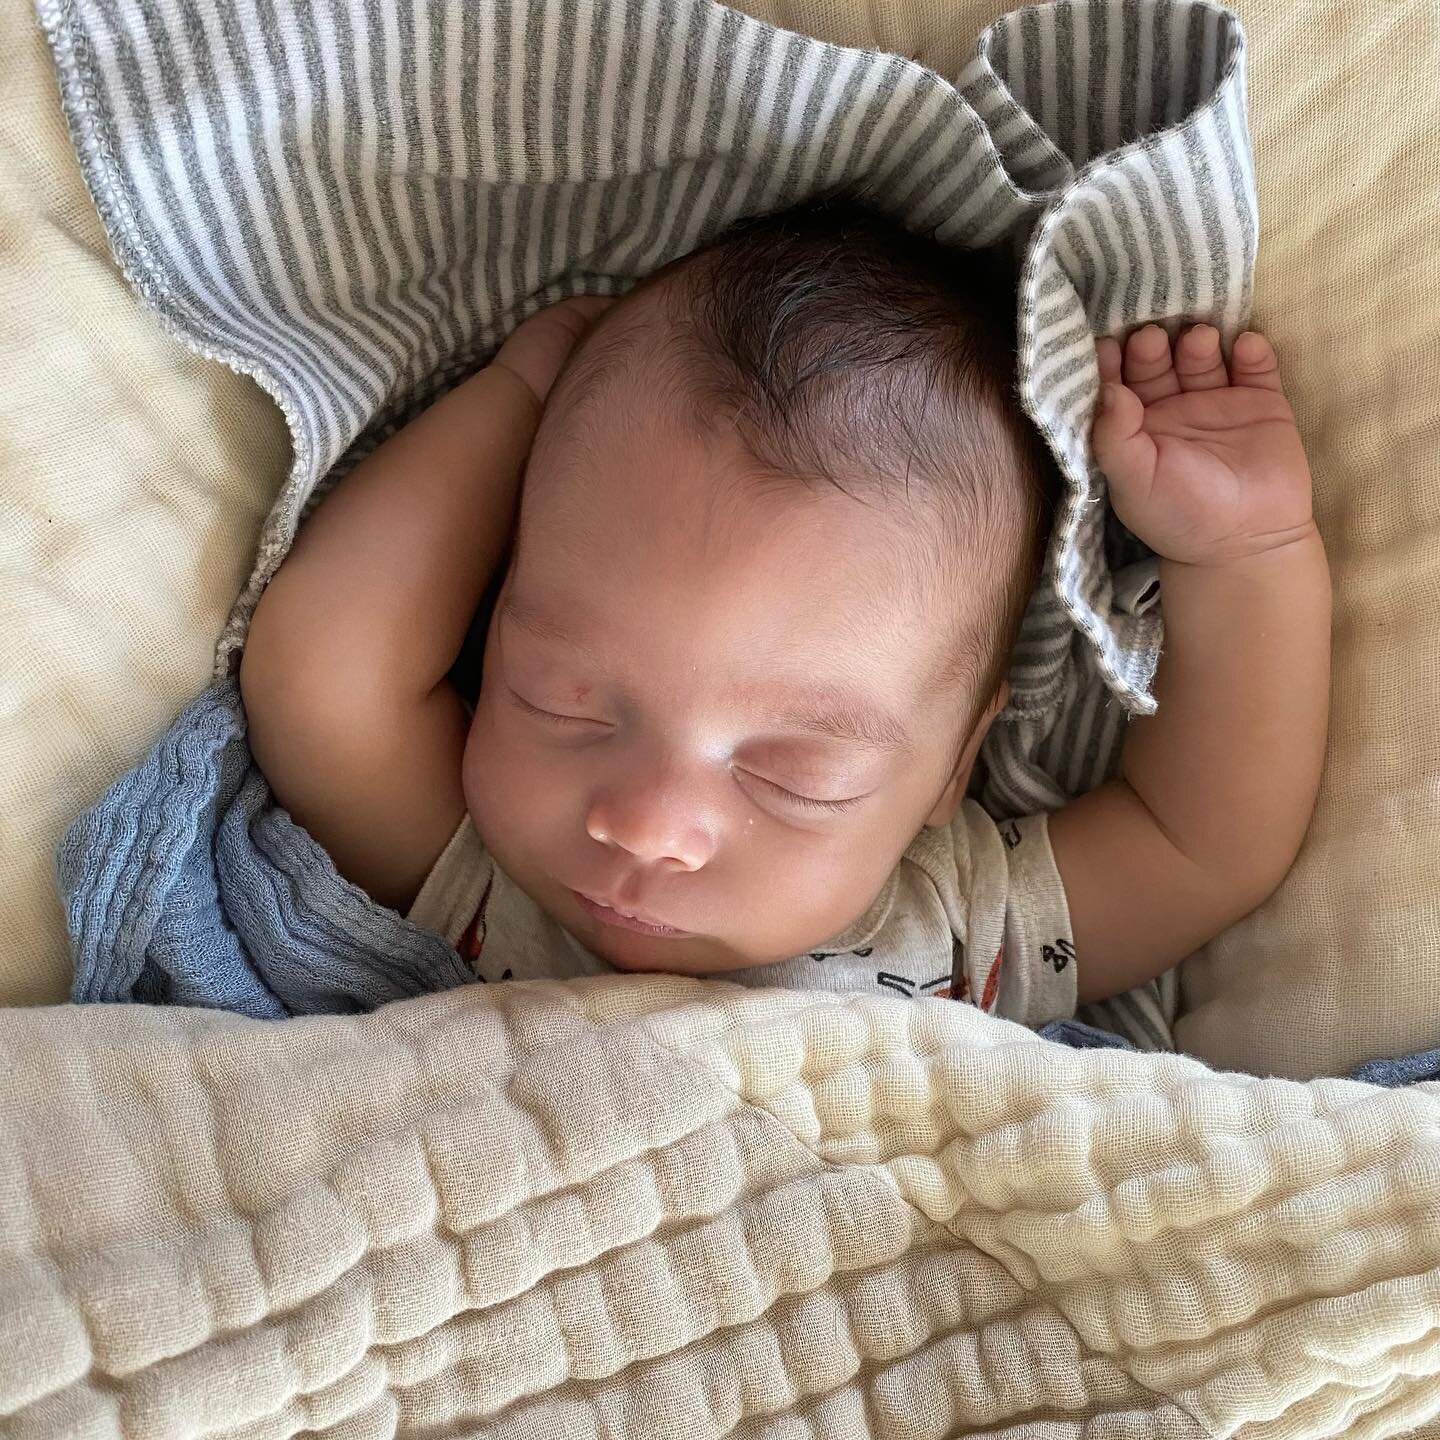 It&rsquo;s been almost two weeks at home with this little guy! Still waiting for Geanna&rsquo;s follow up swallow study on Monday so we aren&rsquo;t sure when she gets to come home. But one exciting thing that I finally get to announce is that I get 